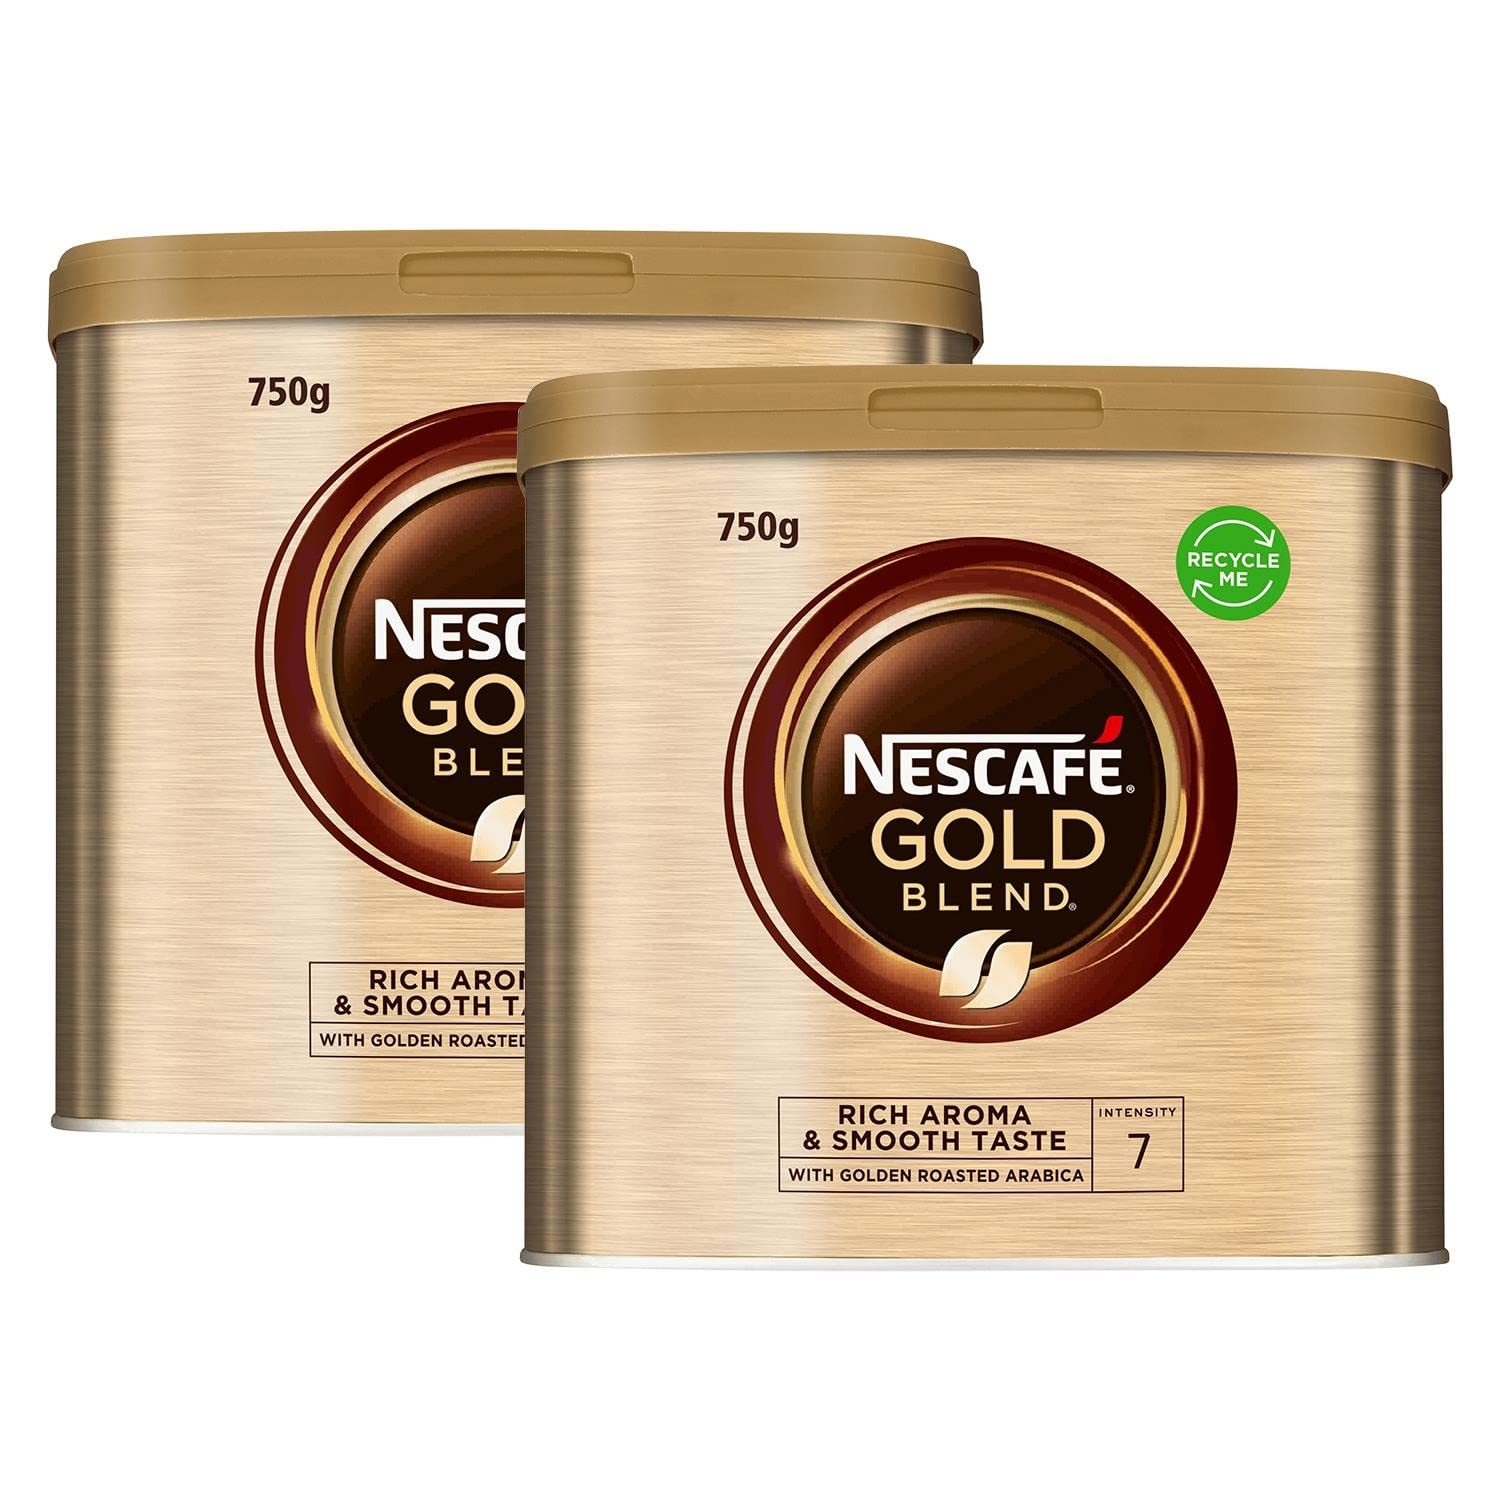 Nescafe Coffee Gold Blend 750G X 2 Packs   price checker   price checker Description Gallery Reviews Variations Additional